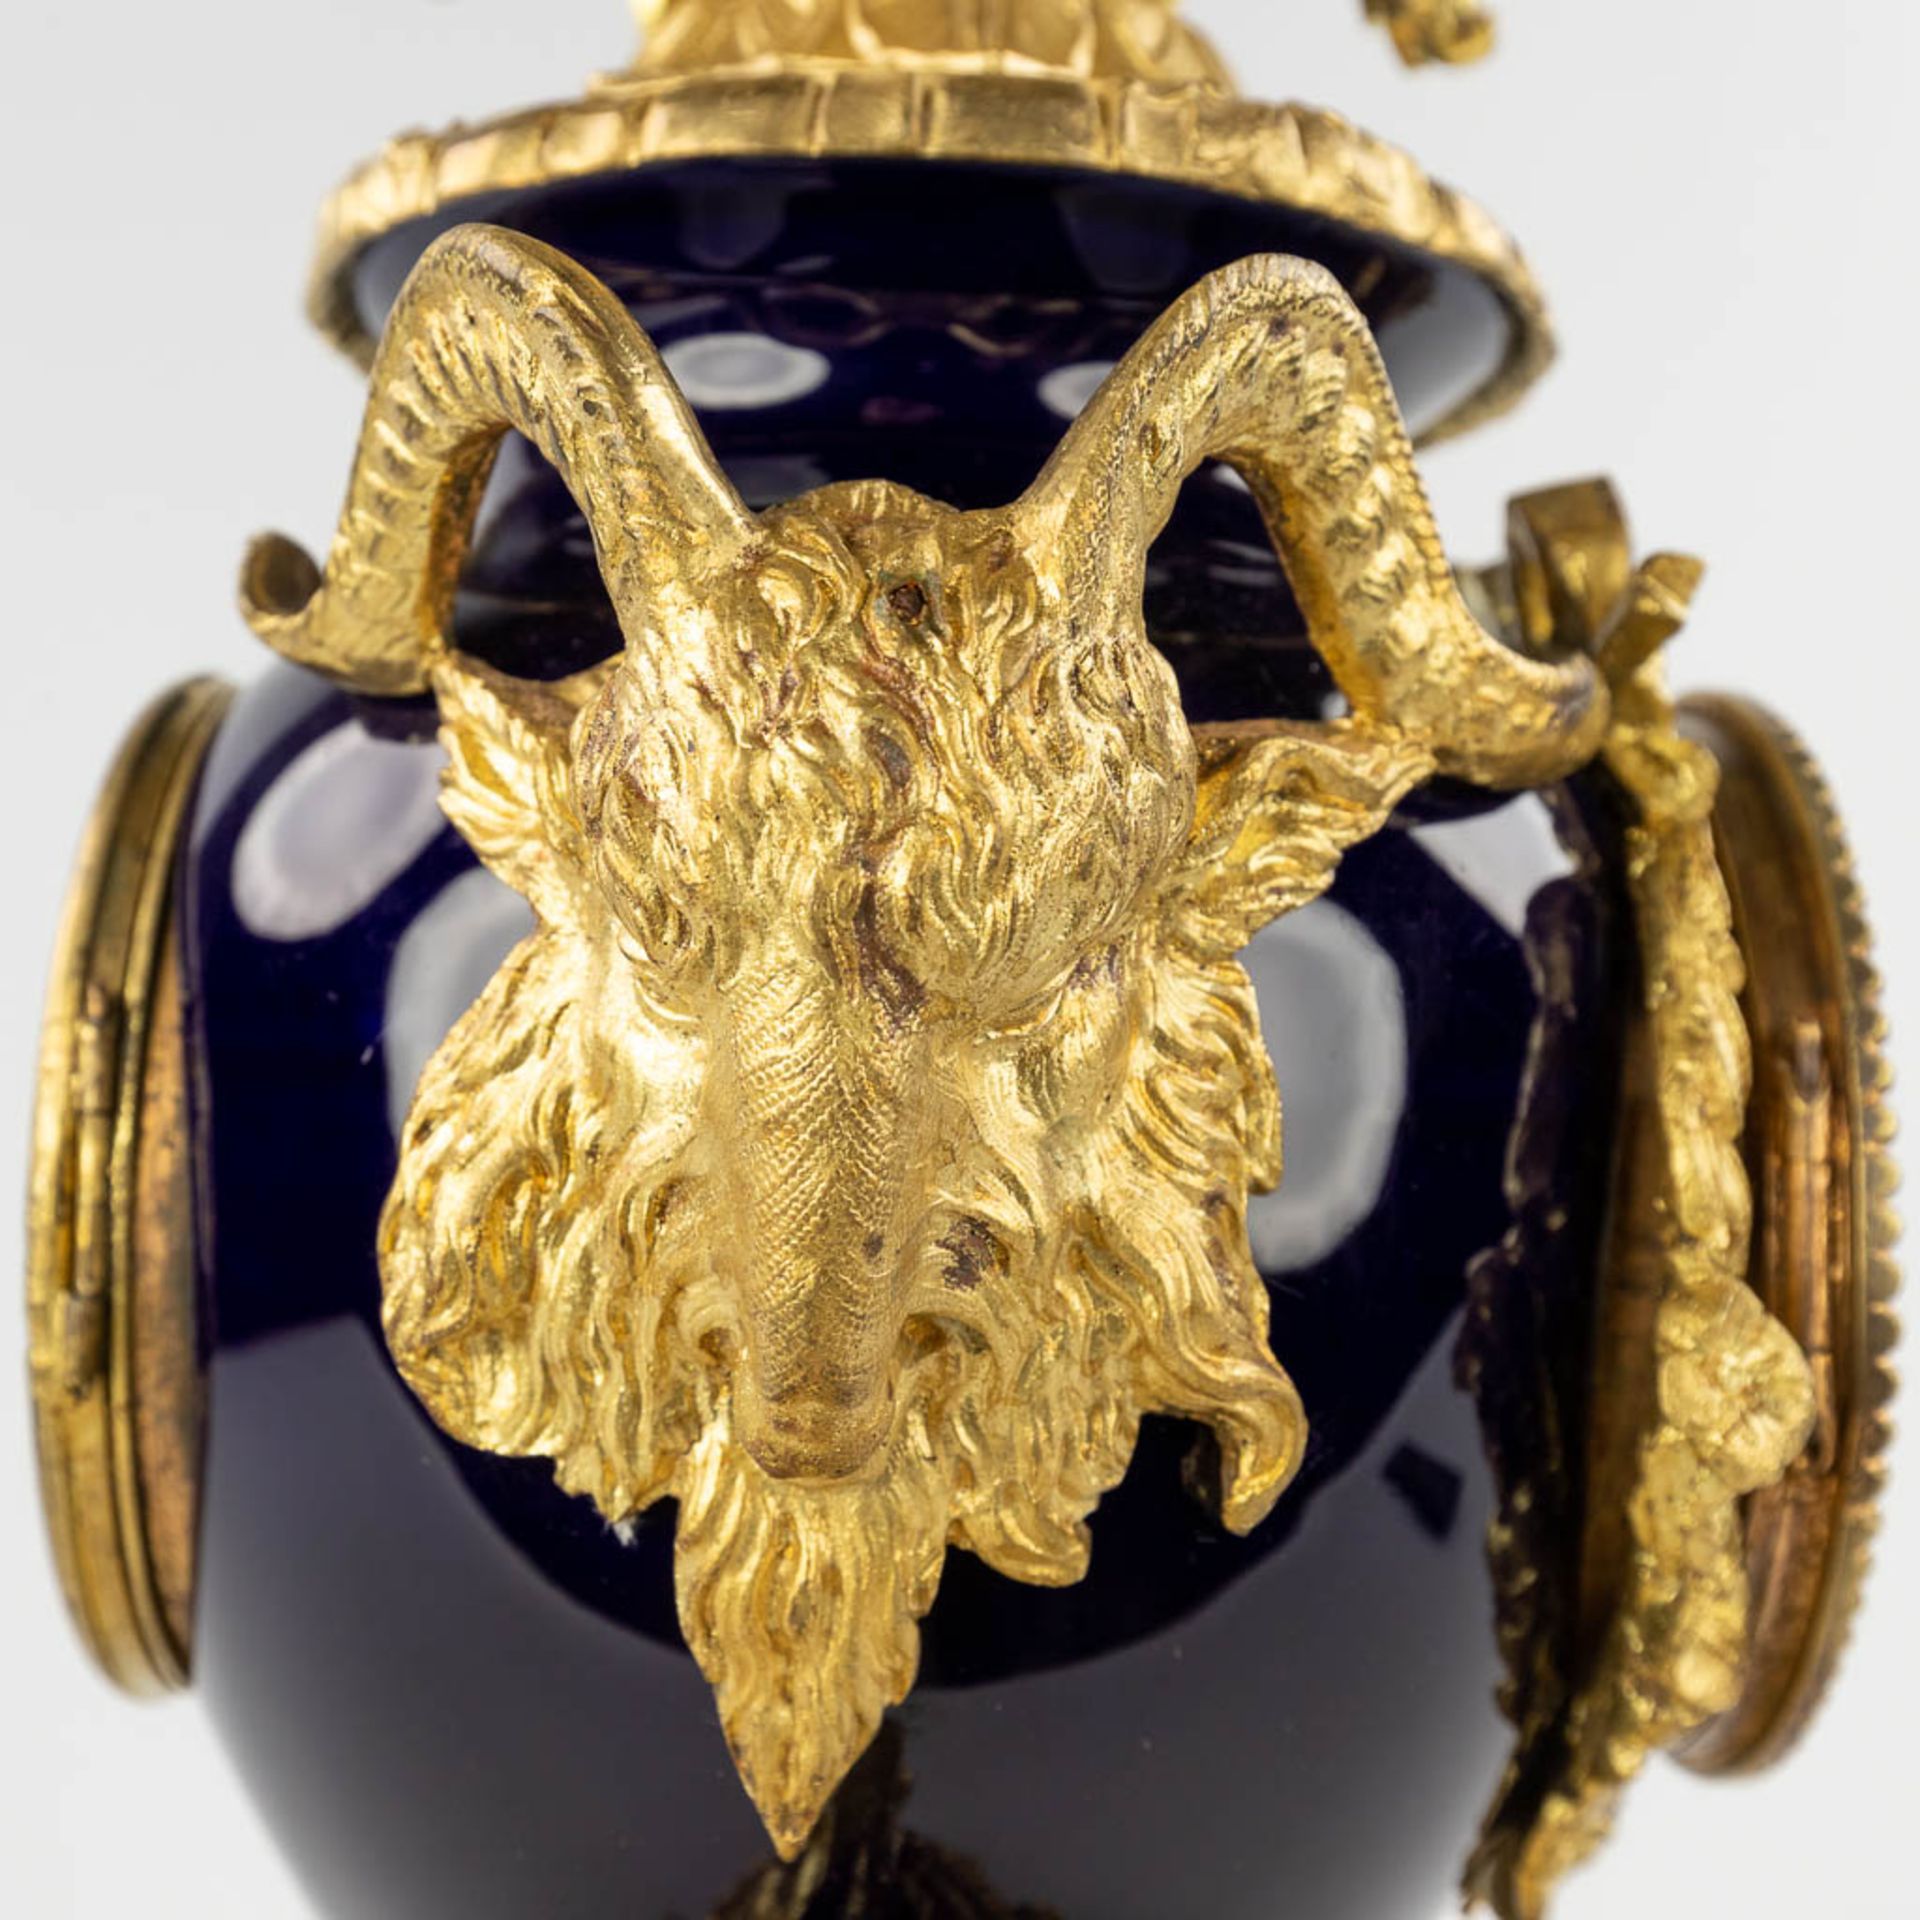 A mantle clock, gold-plated bronze on porcelain, finished with ram's heads. 19th C. (D:17 x W:46 x H - Bild 12 aus 16